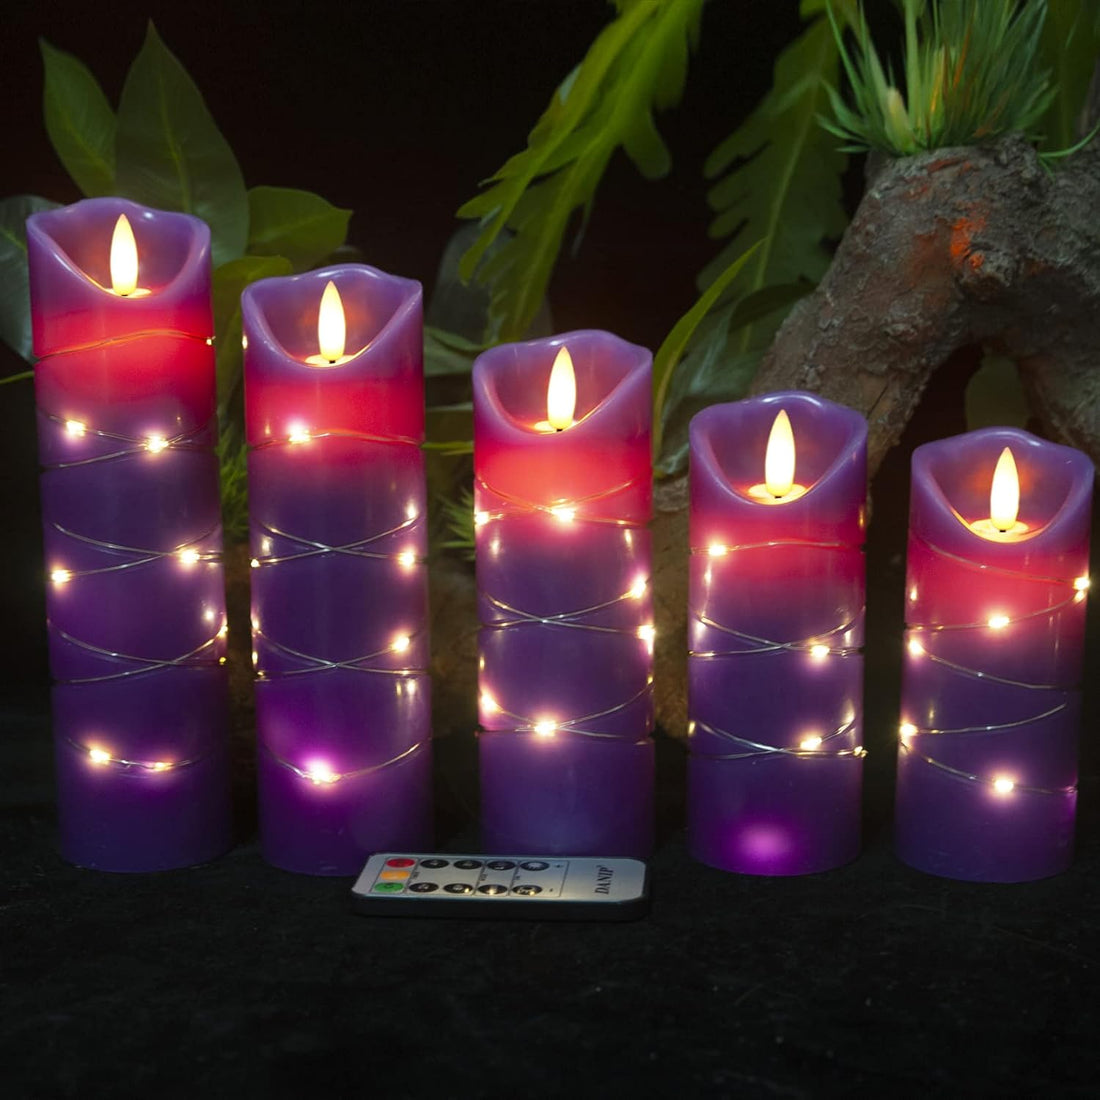 DANIP Purple Flameless Candle, Built-in Star String, 5 LED Candles, 11 Button Remote Control, 24 Hours Timer (Purple)